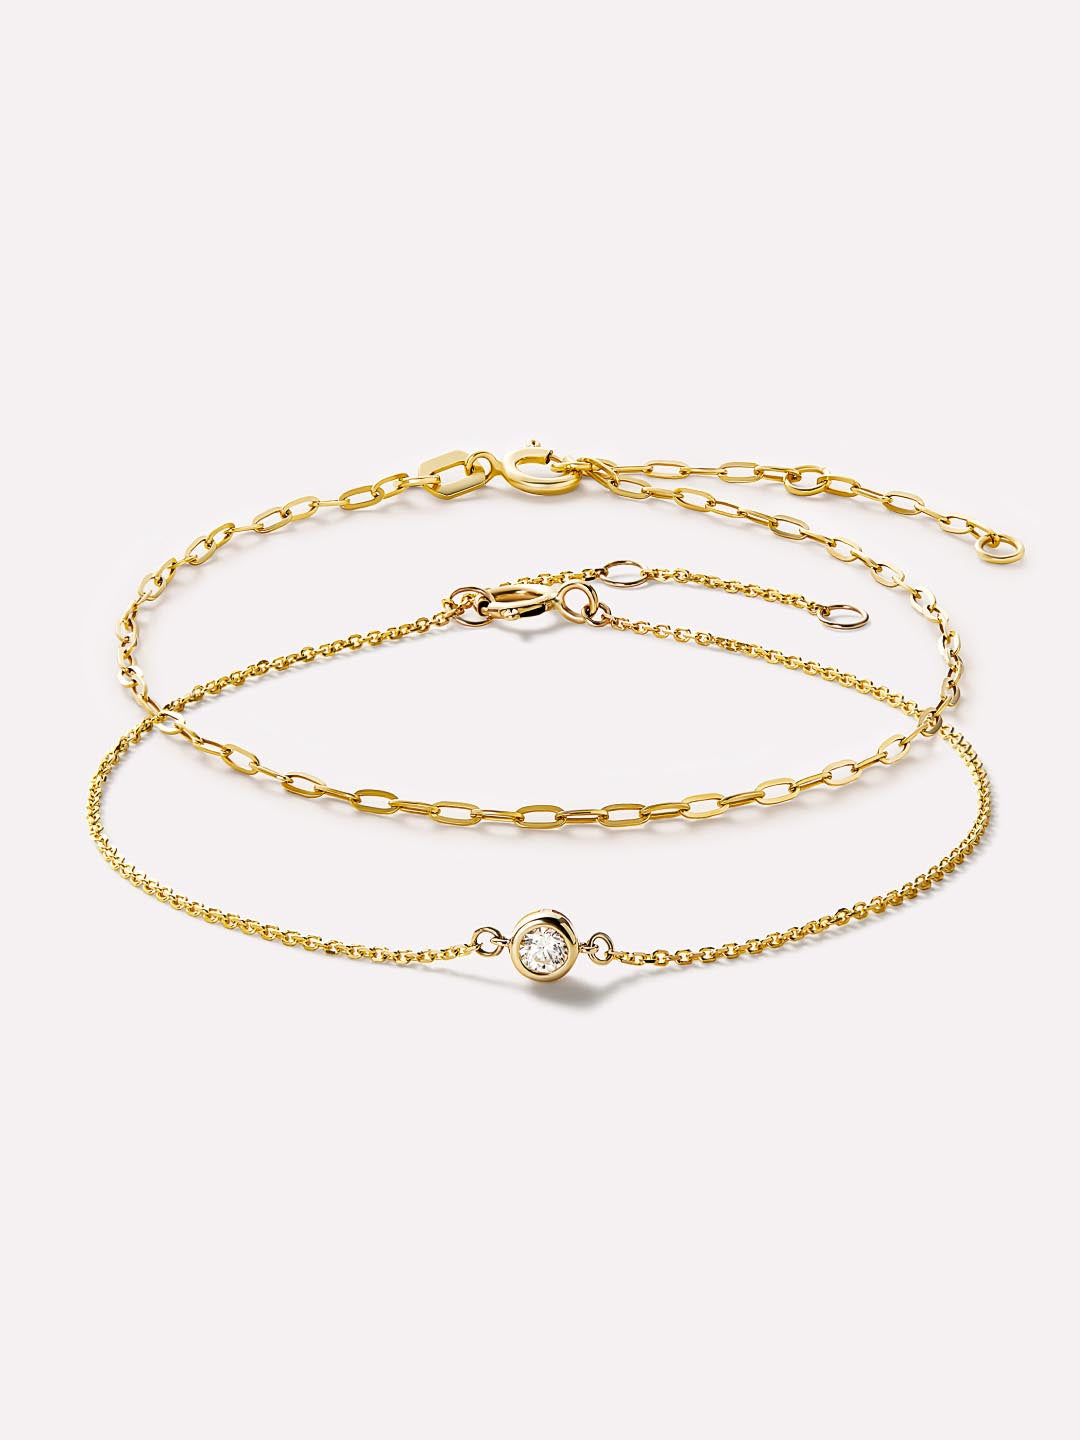 Bracelet Duo Bundle - Bracelet Duo Bundle | Ana Luisa | Online Jewelry  Store At Prices You'll Love